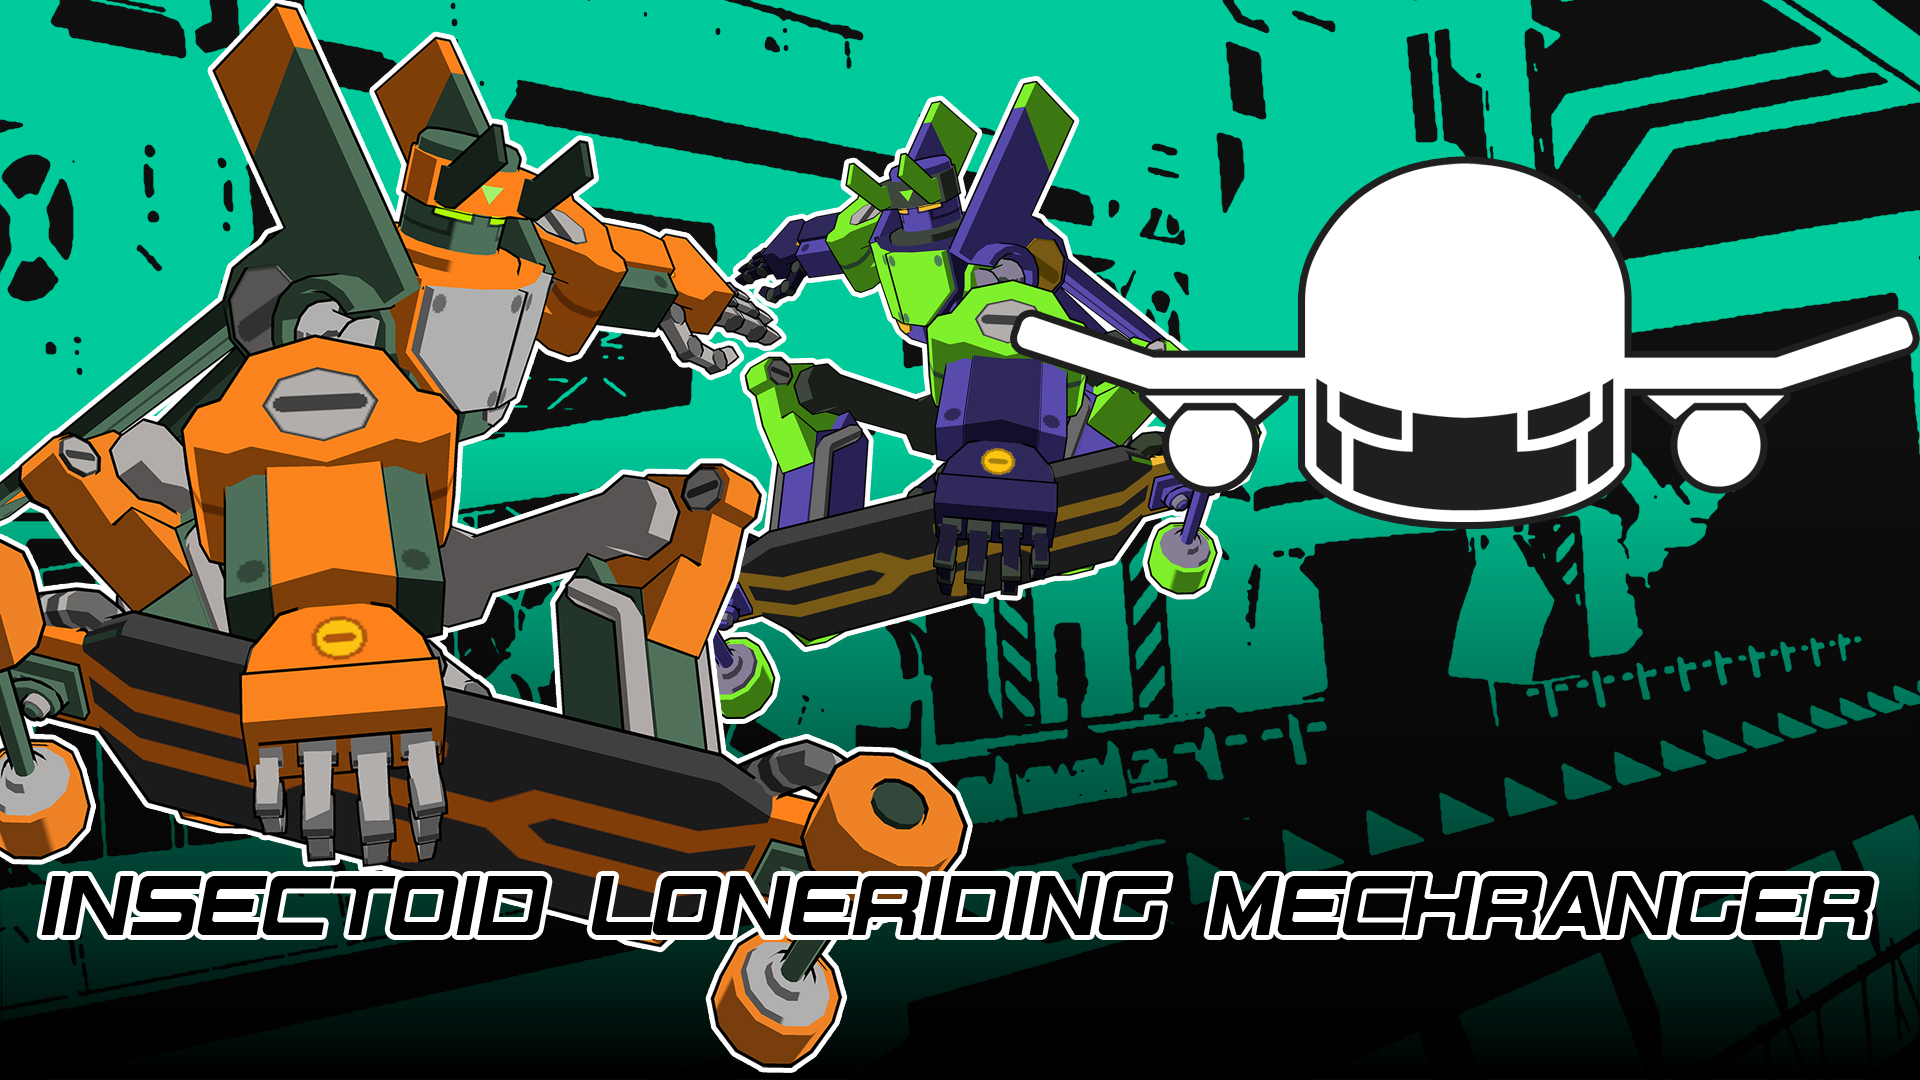 Insectoid Loneriding Mechranger Outfit for Switch